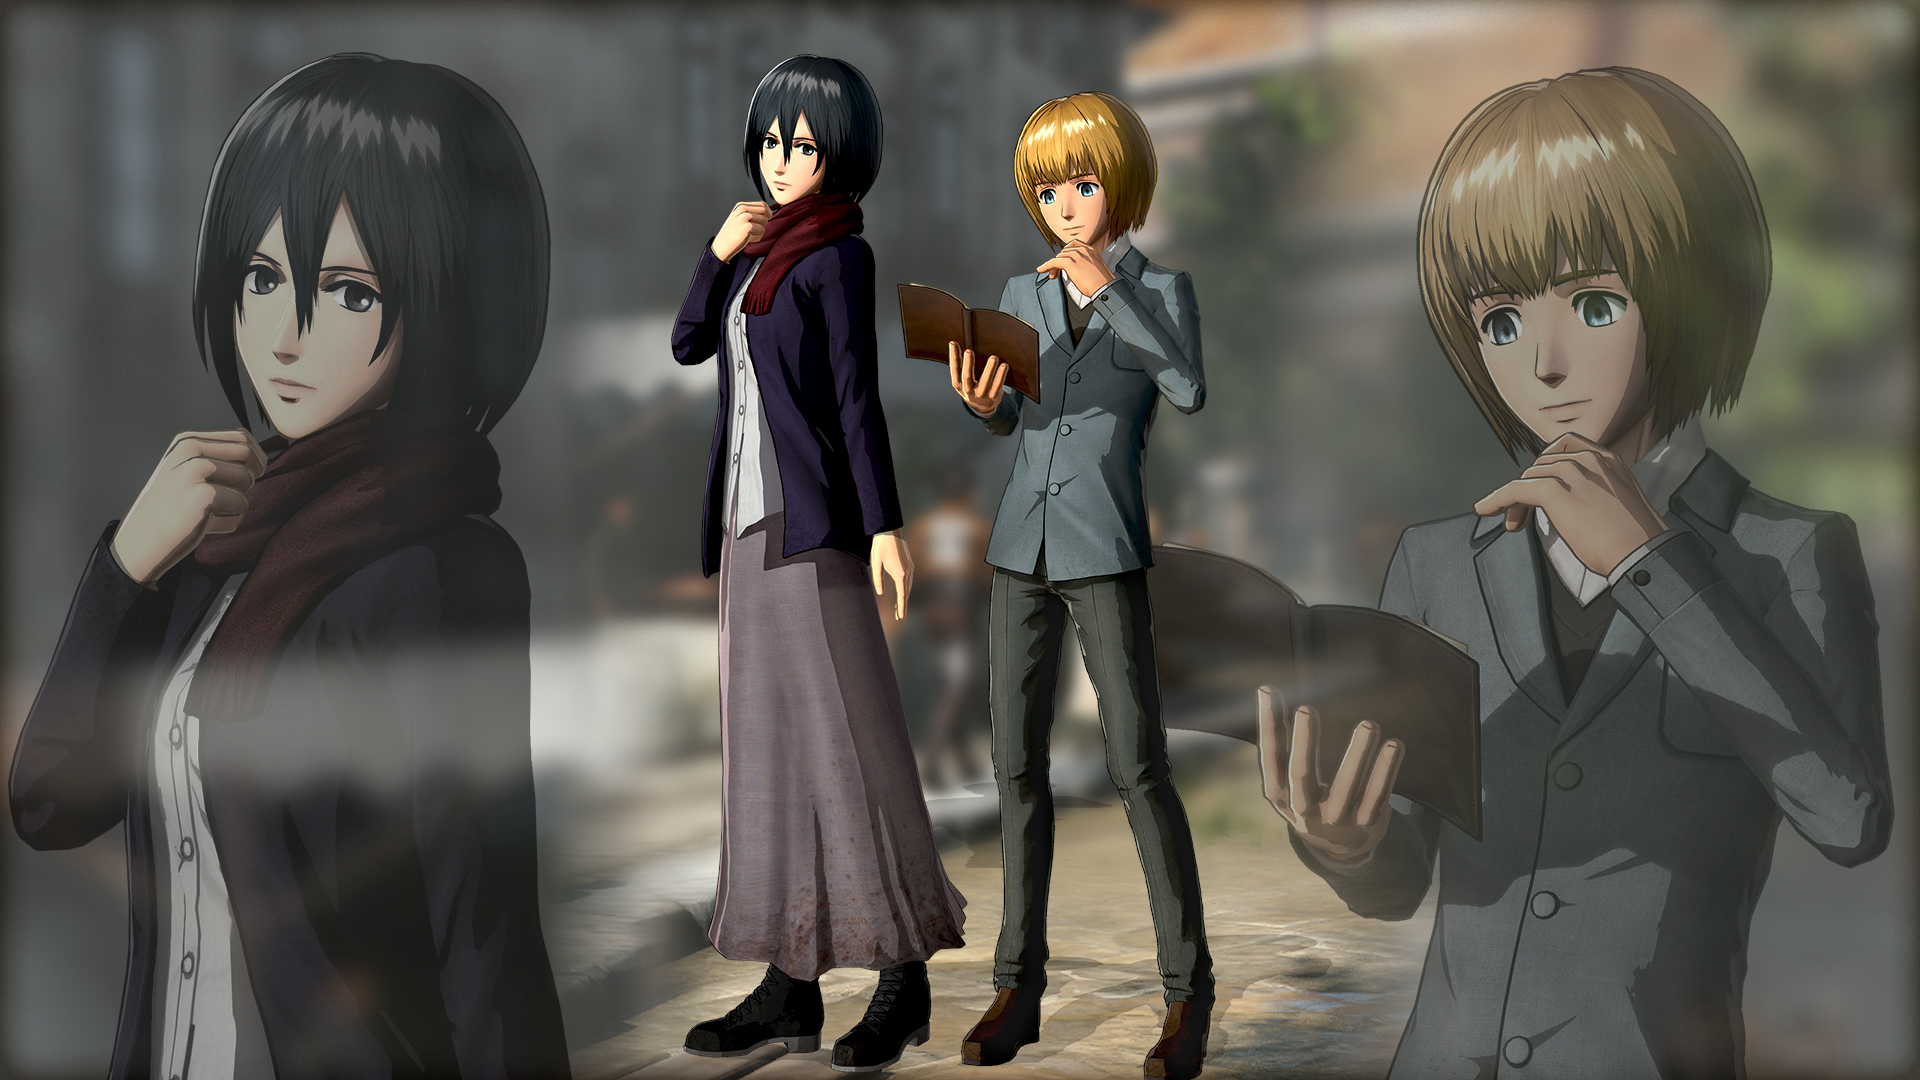 Attack on Titan 2: Mikasa & Armin "Plain clothes" Outfit Early Release